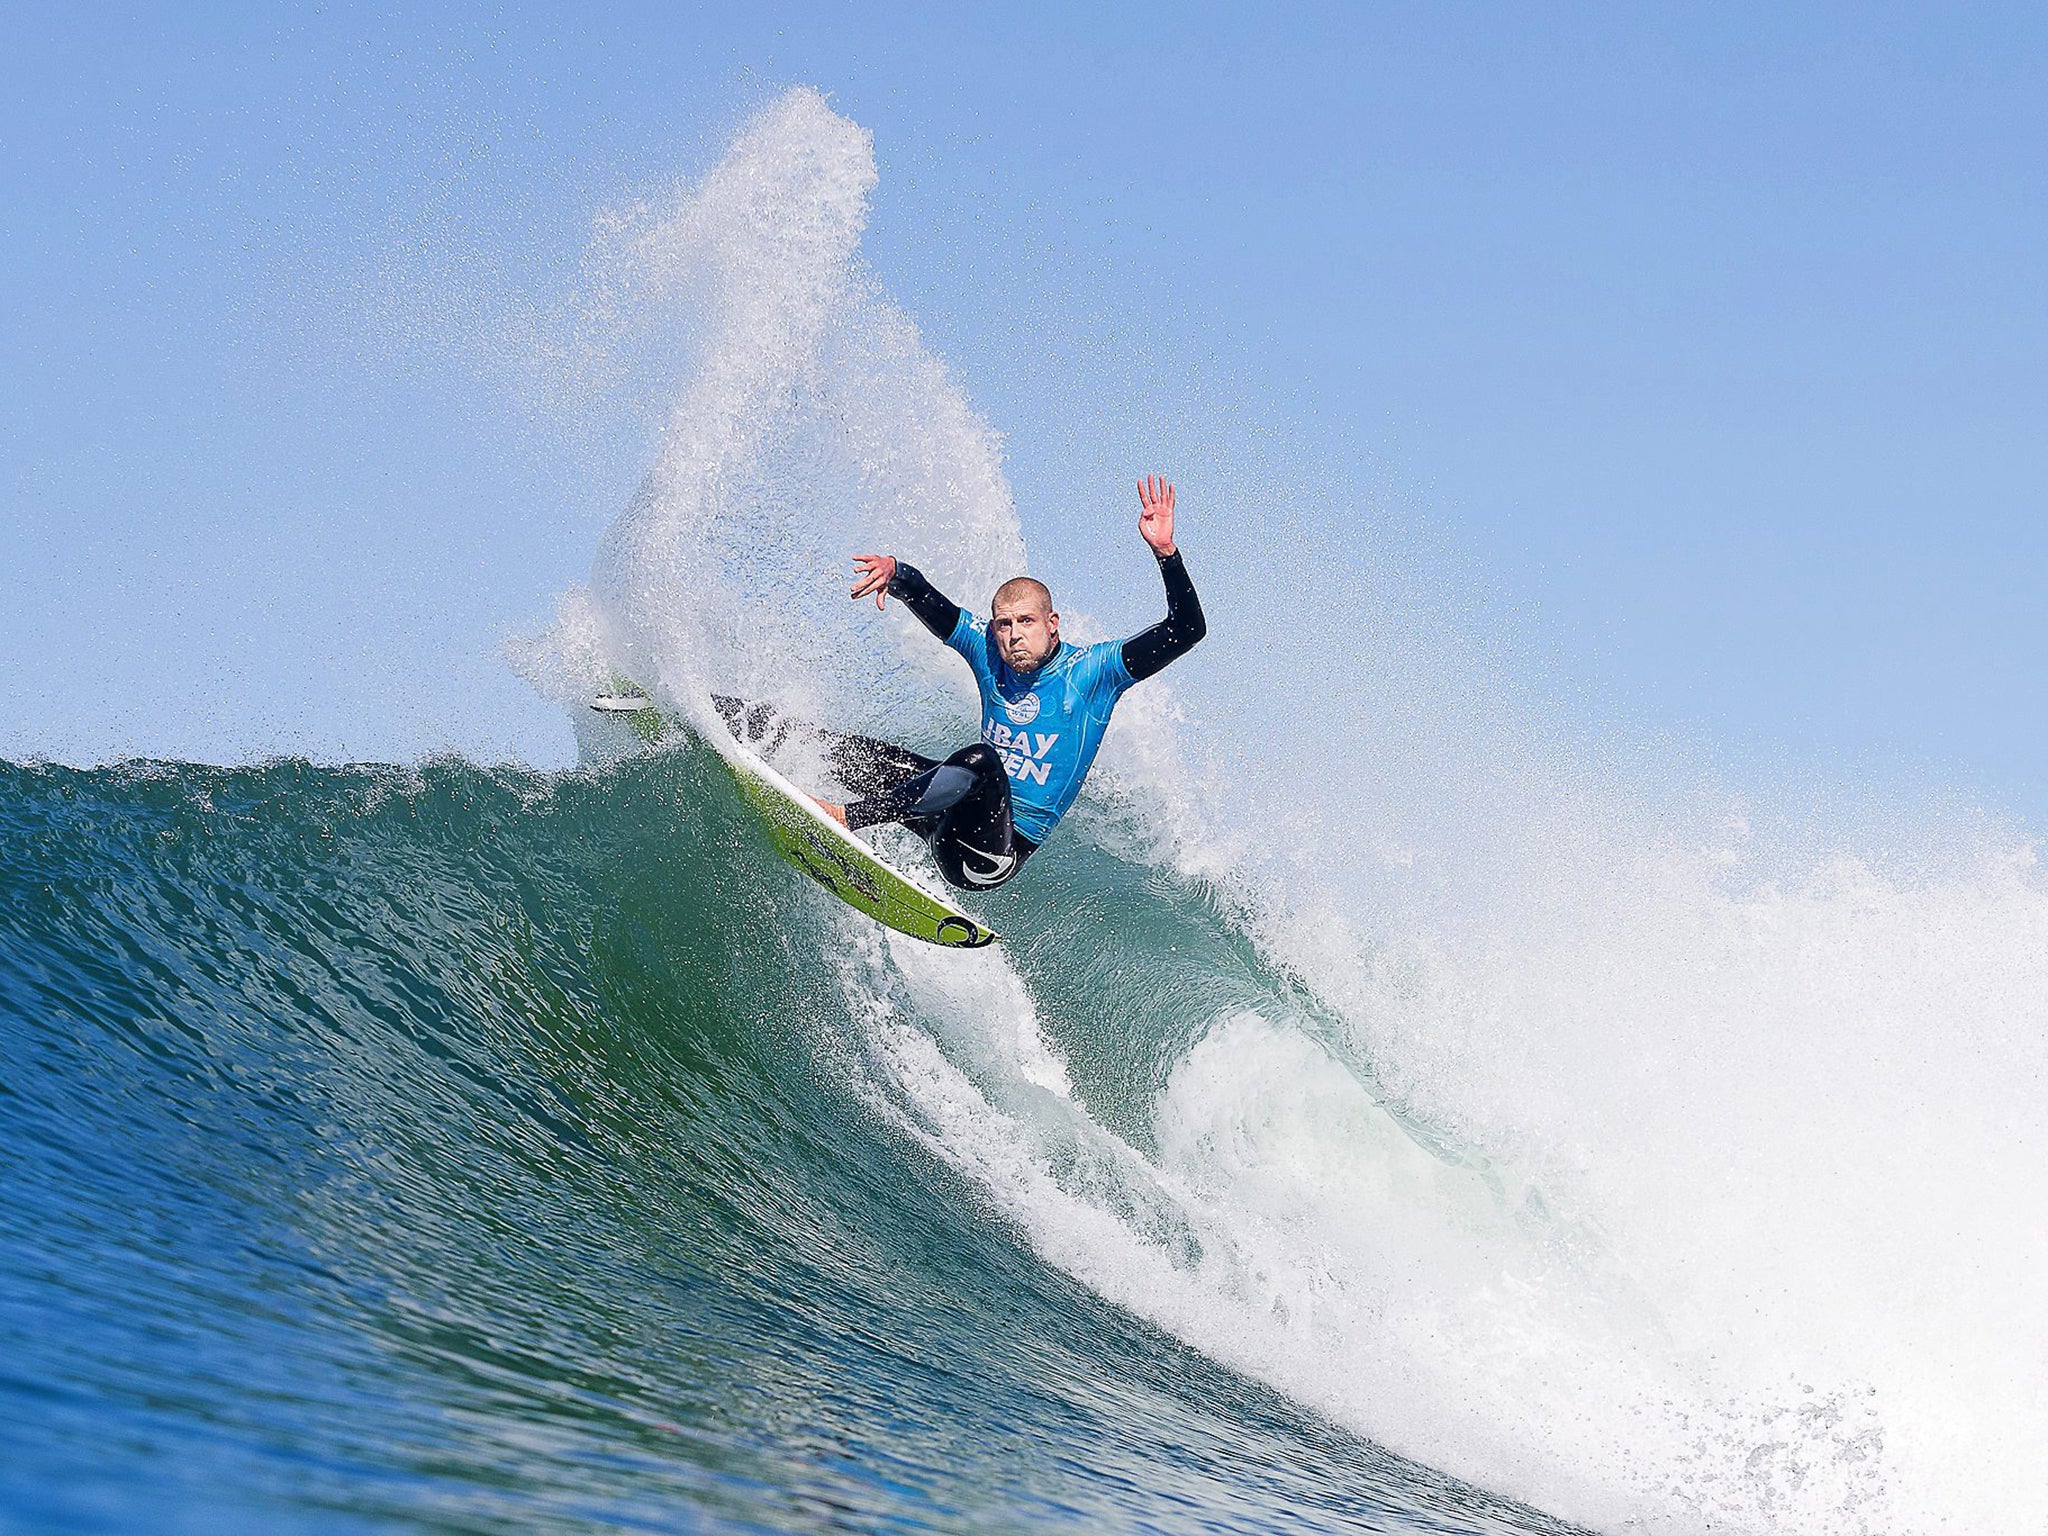 Mick Fanning in action during the quarter final round of the JBay Open surfing event